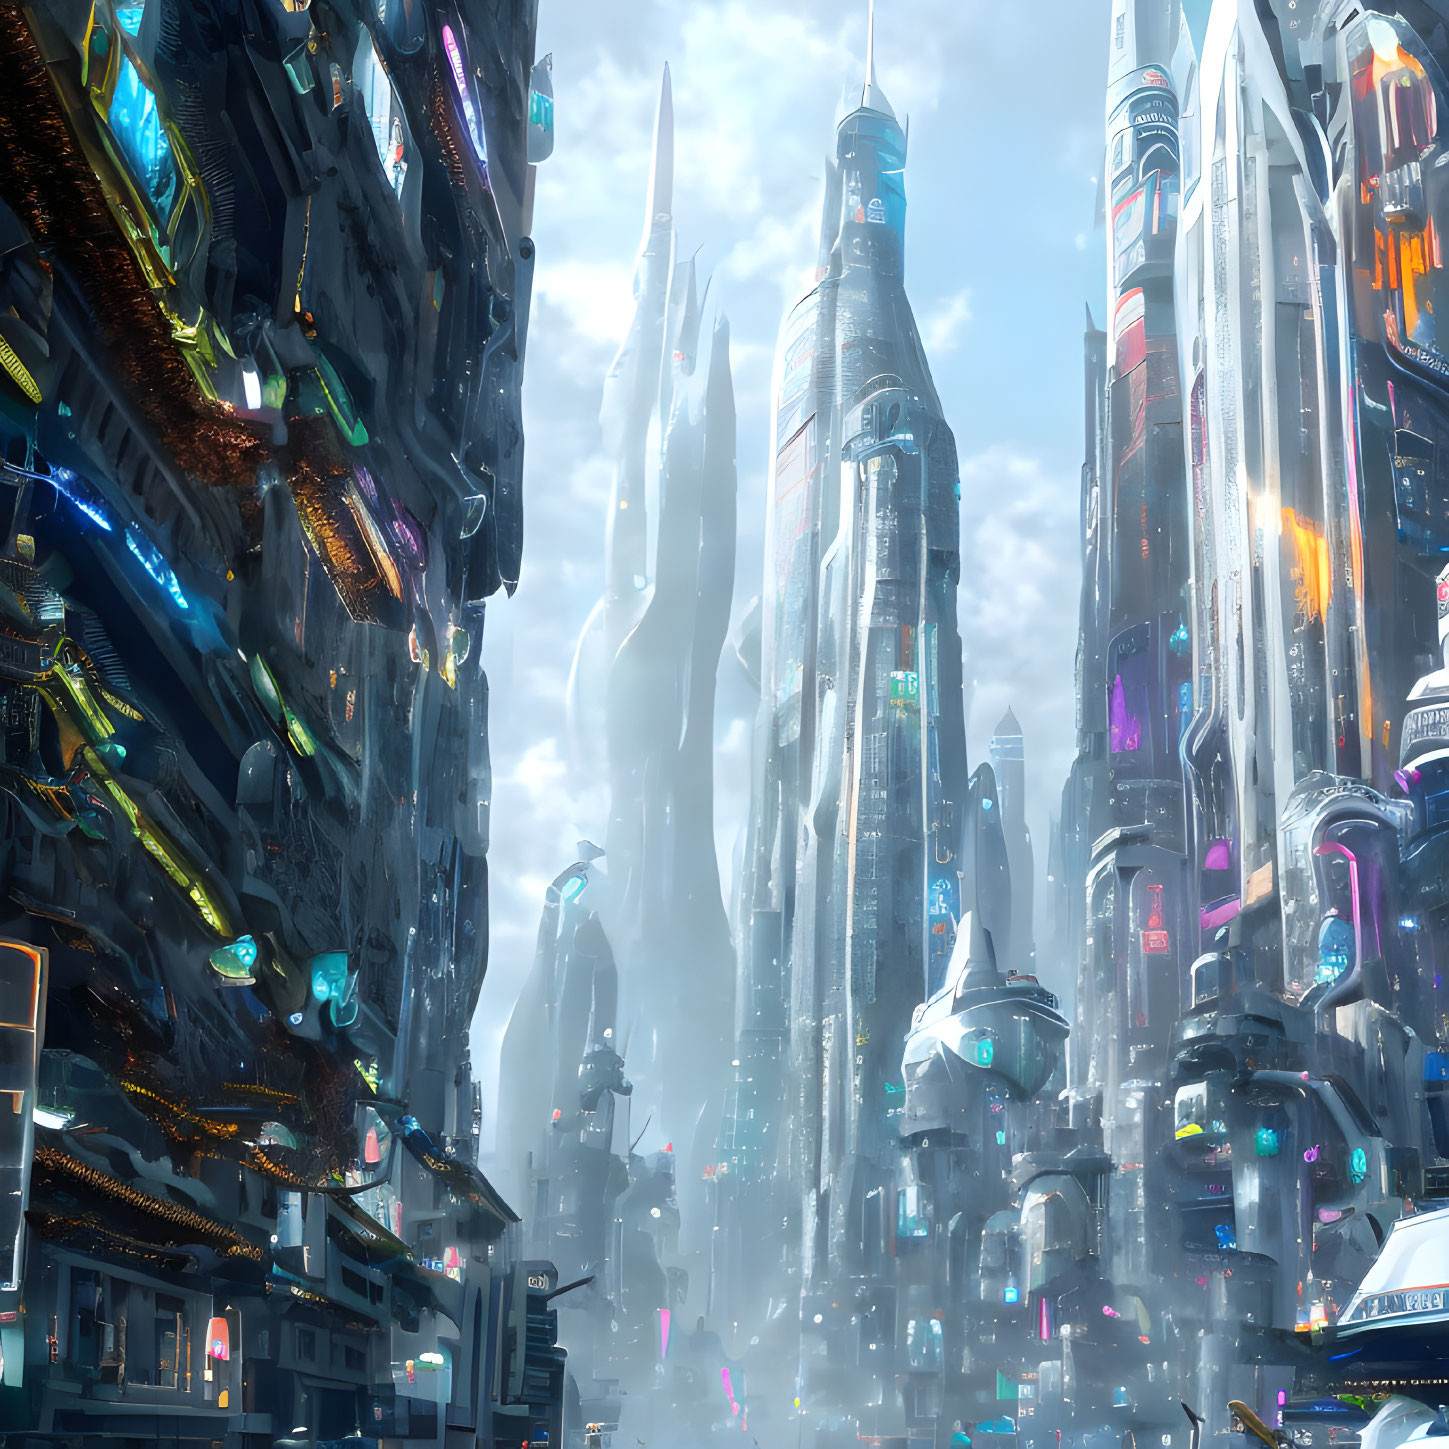 Futuristic cityscape with skyscrapers, neon signs, and flying vehicles